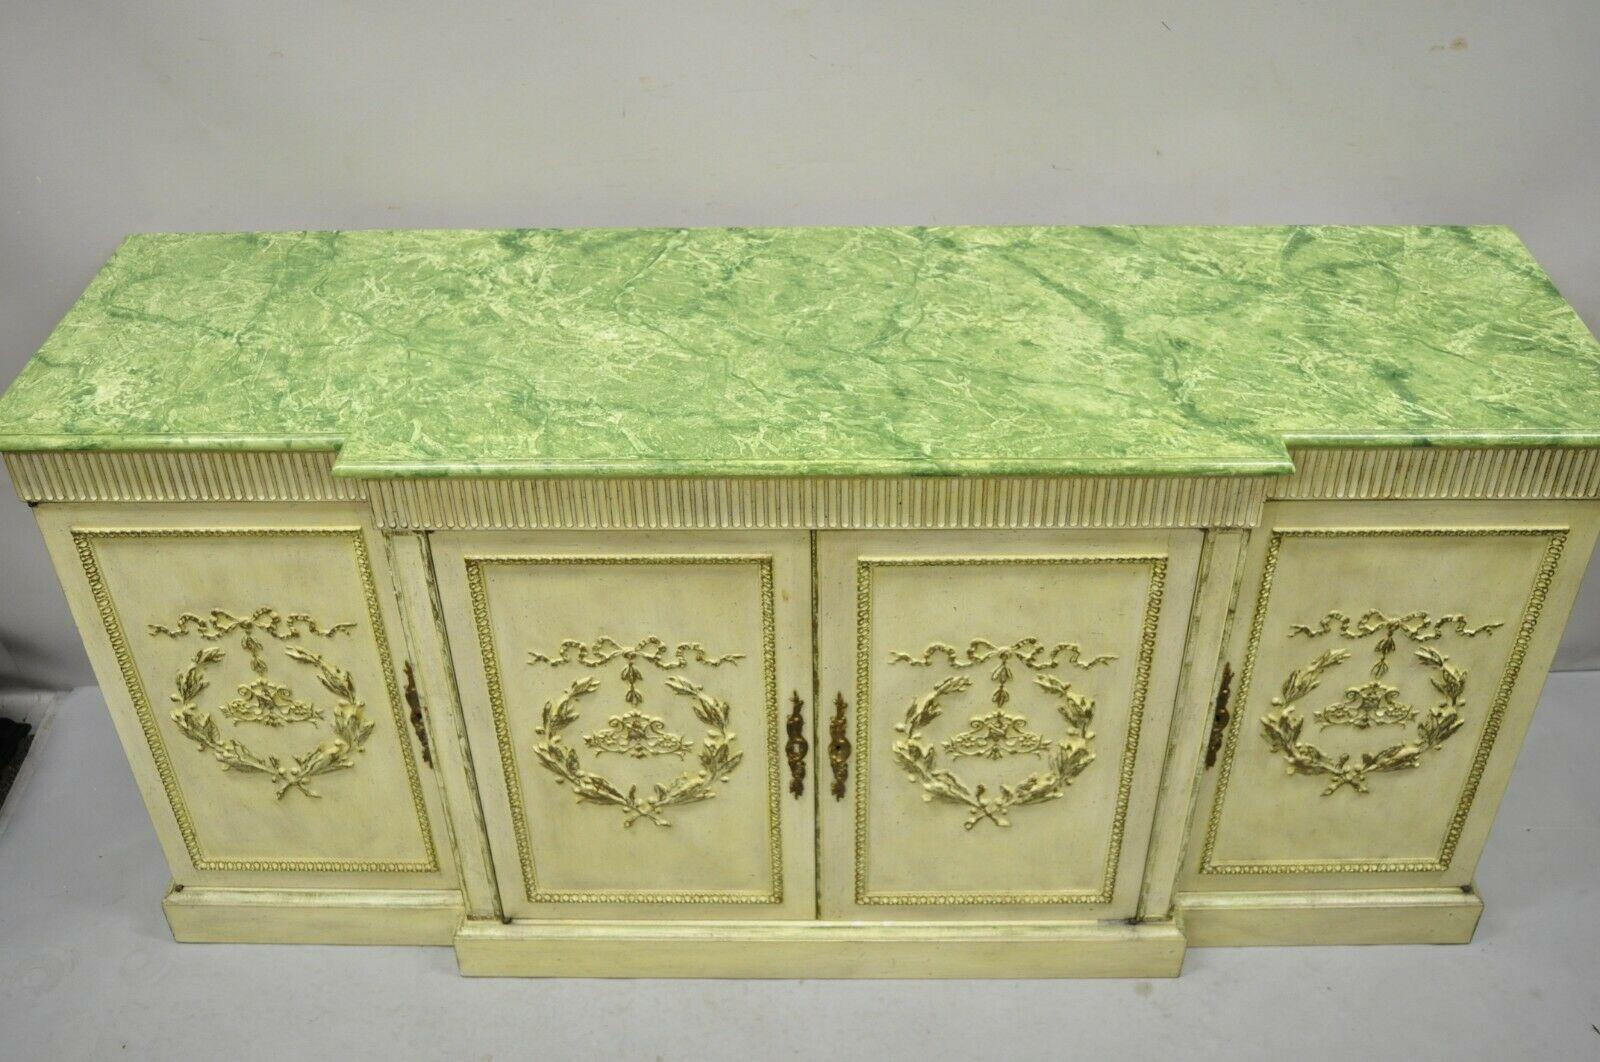 Vintage Italian neoclassical style cream painted buffet sideboard credenza green faux marble top. Item features a wooden faux marble green lacquer top, floral and wreath detail, cream distressed finish, 4 swing doors, 3 drawers, quality Italian